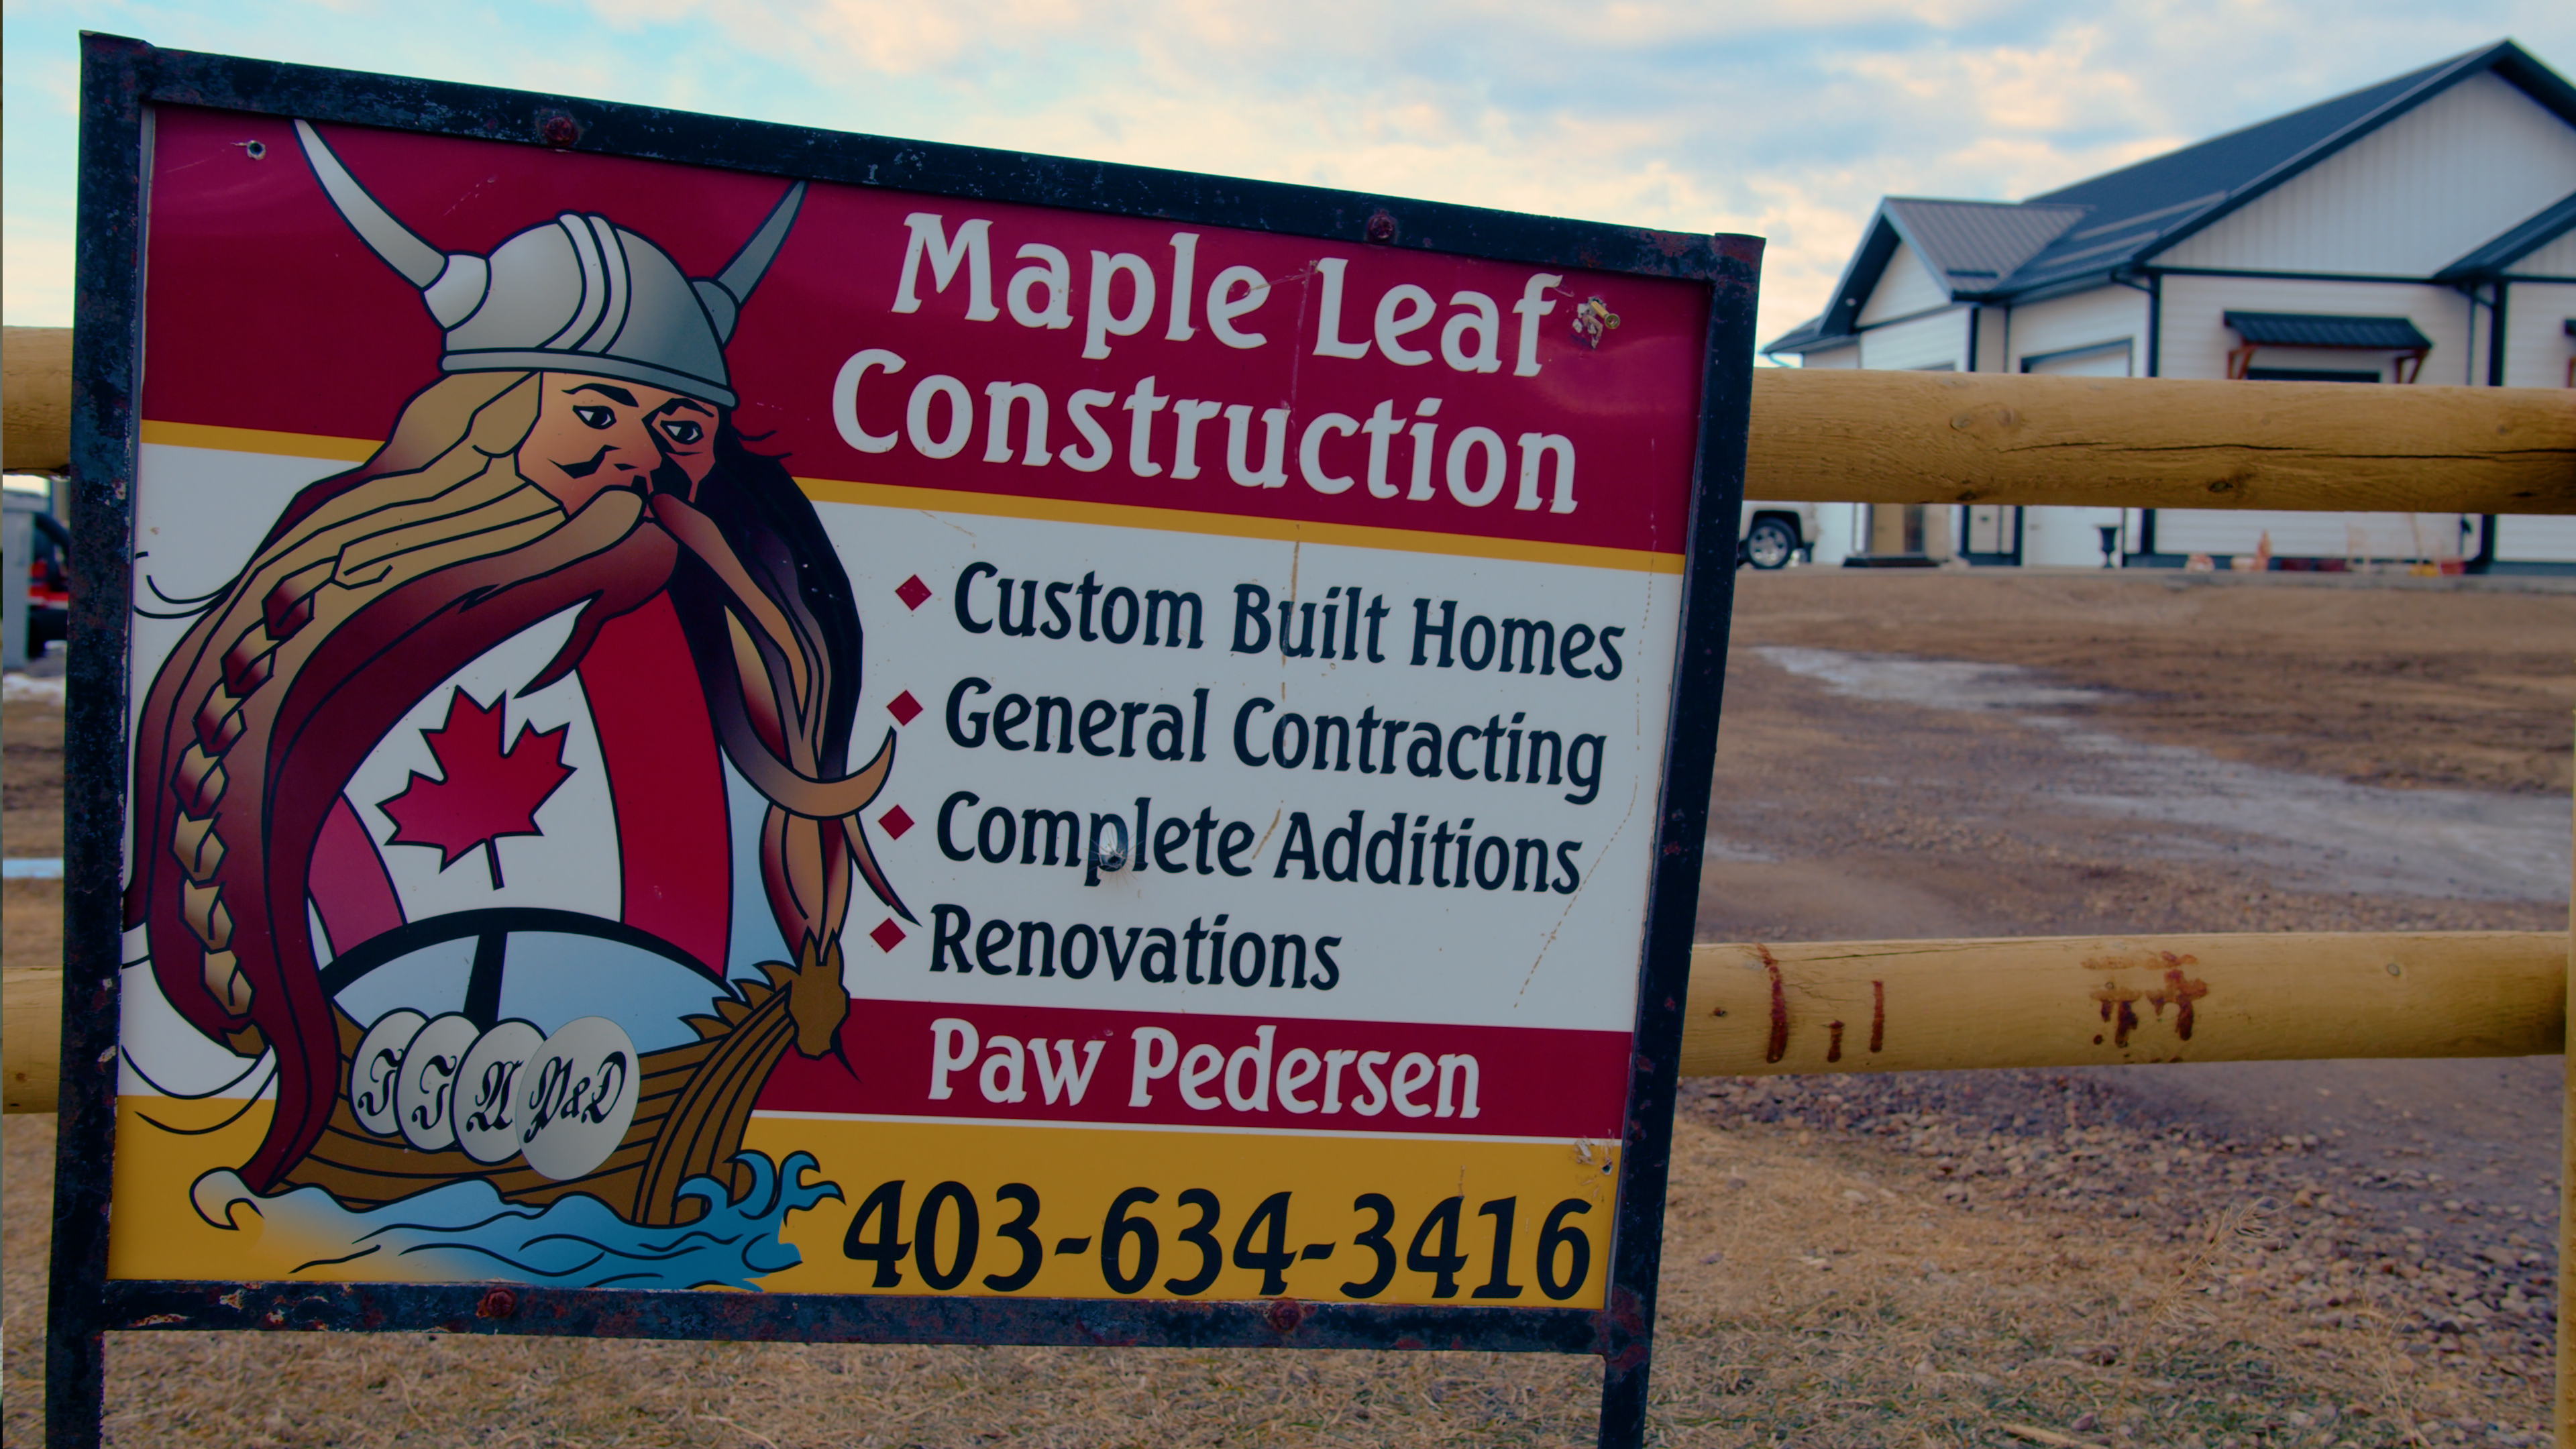 Contract Custom Builds and Renos with Maple Leaf Construction in Taber, Alberta!